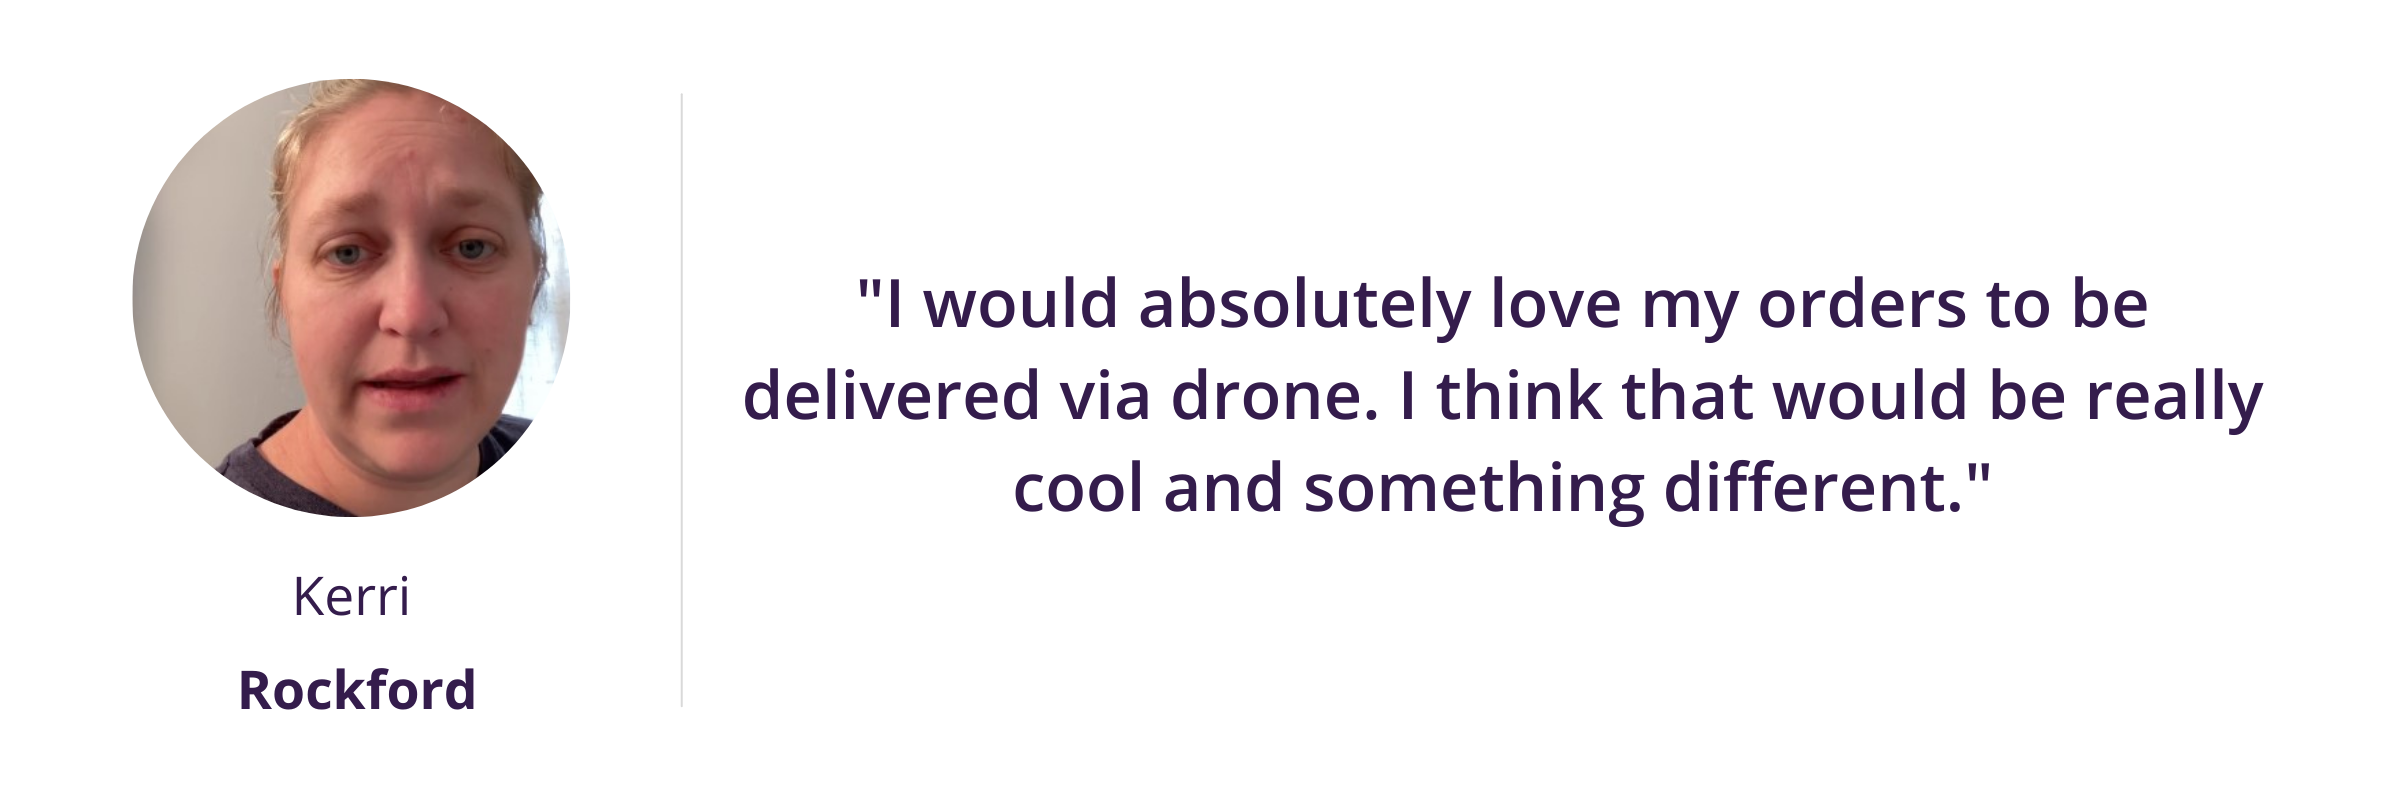 "I would absolutely love my orders to be delivered via drone. I think that would be really cool and something different."